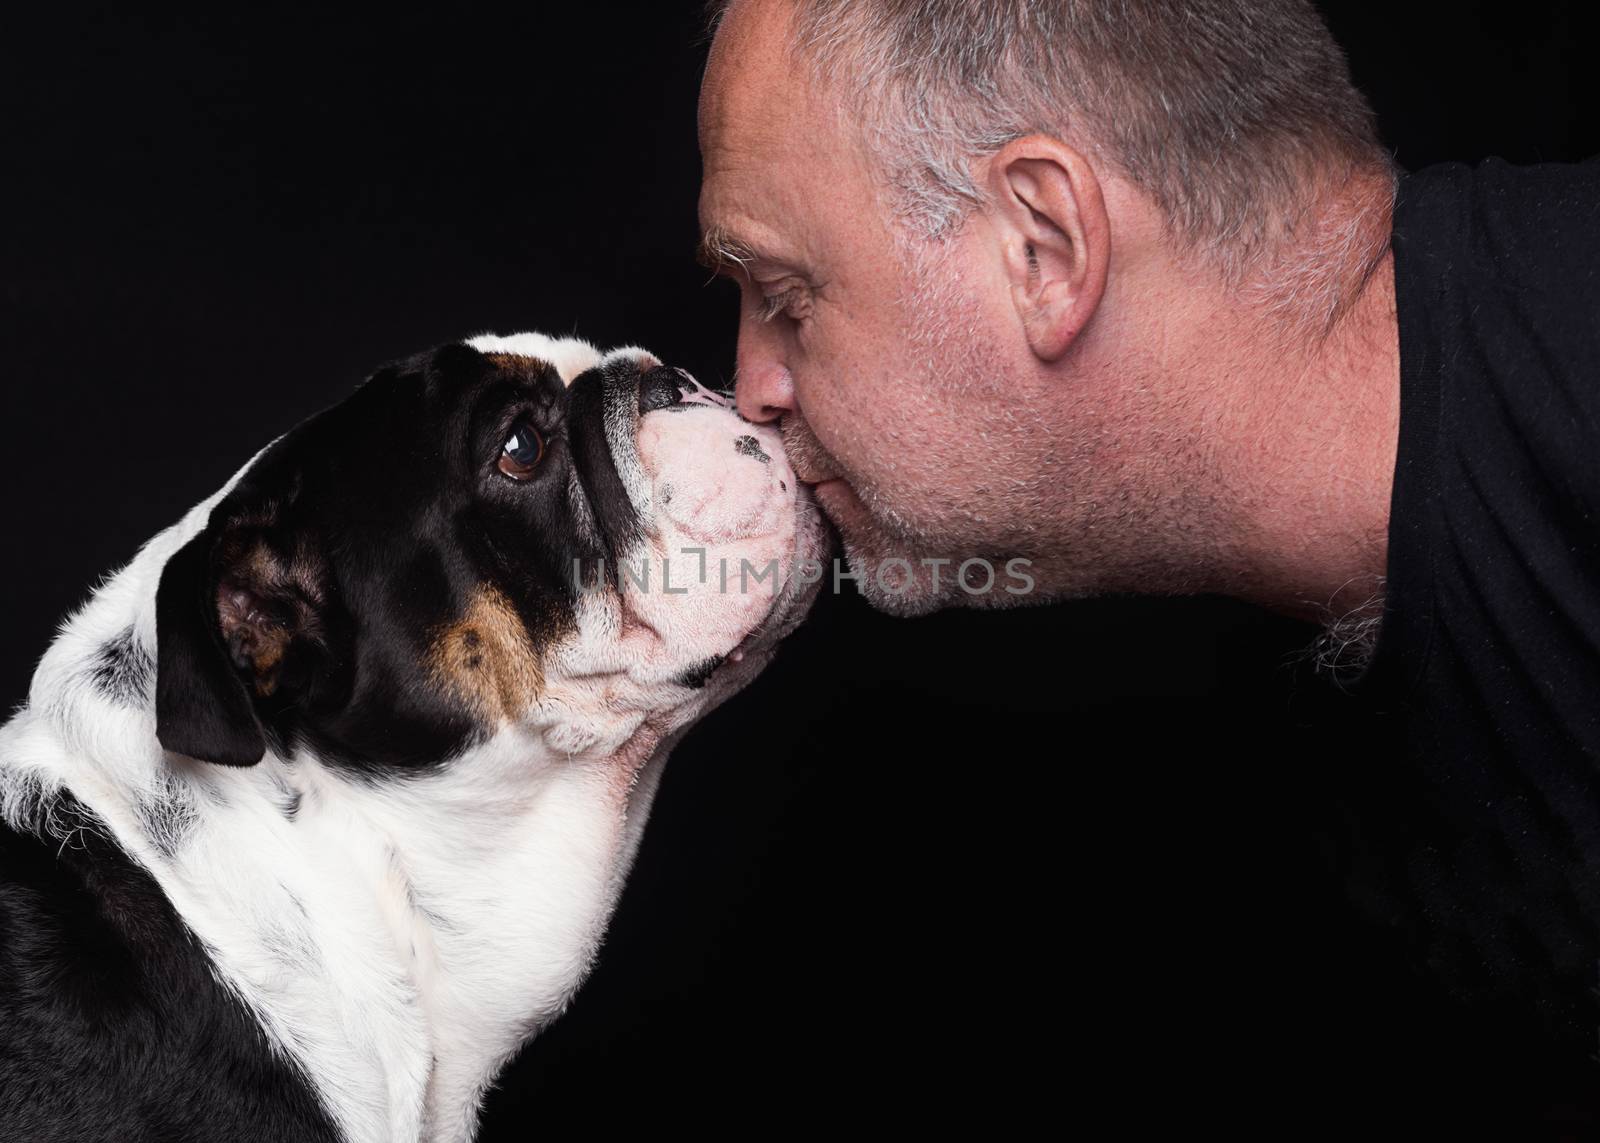 Black and white English Bulldog and man looking each other against black background